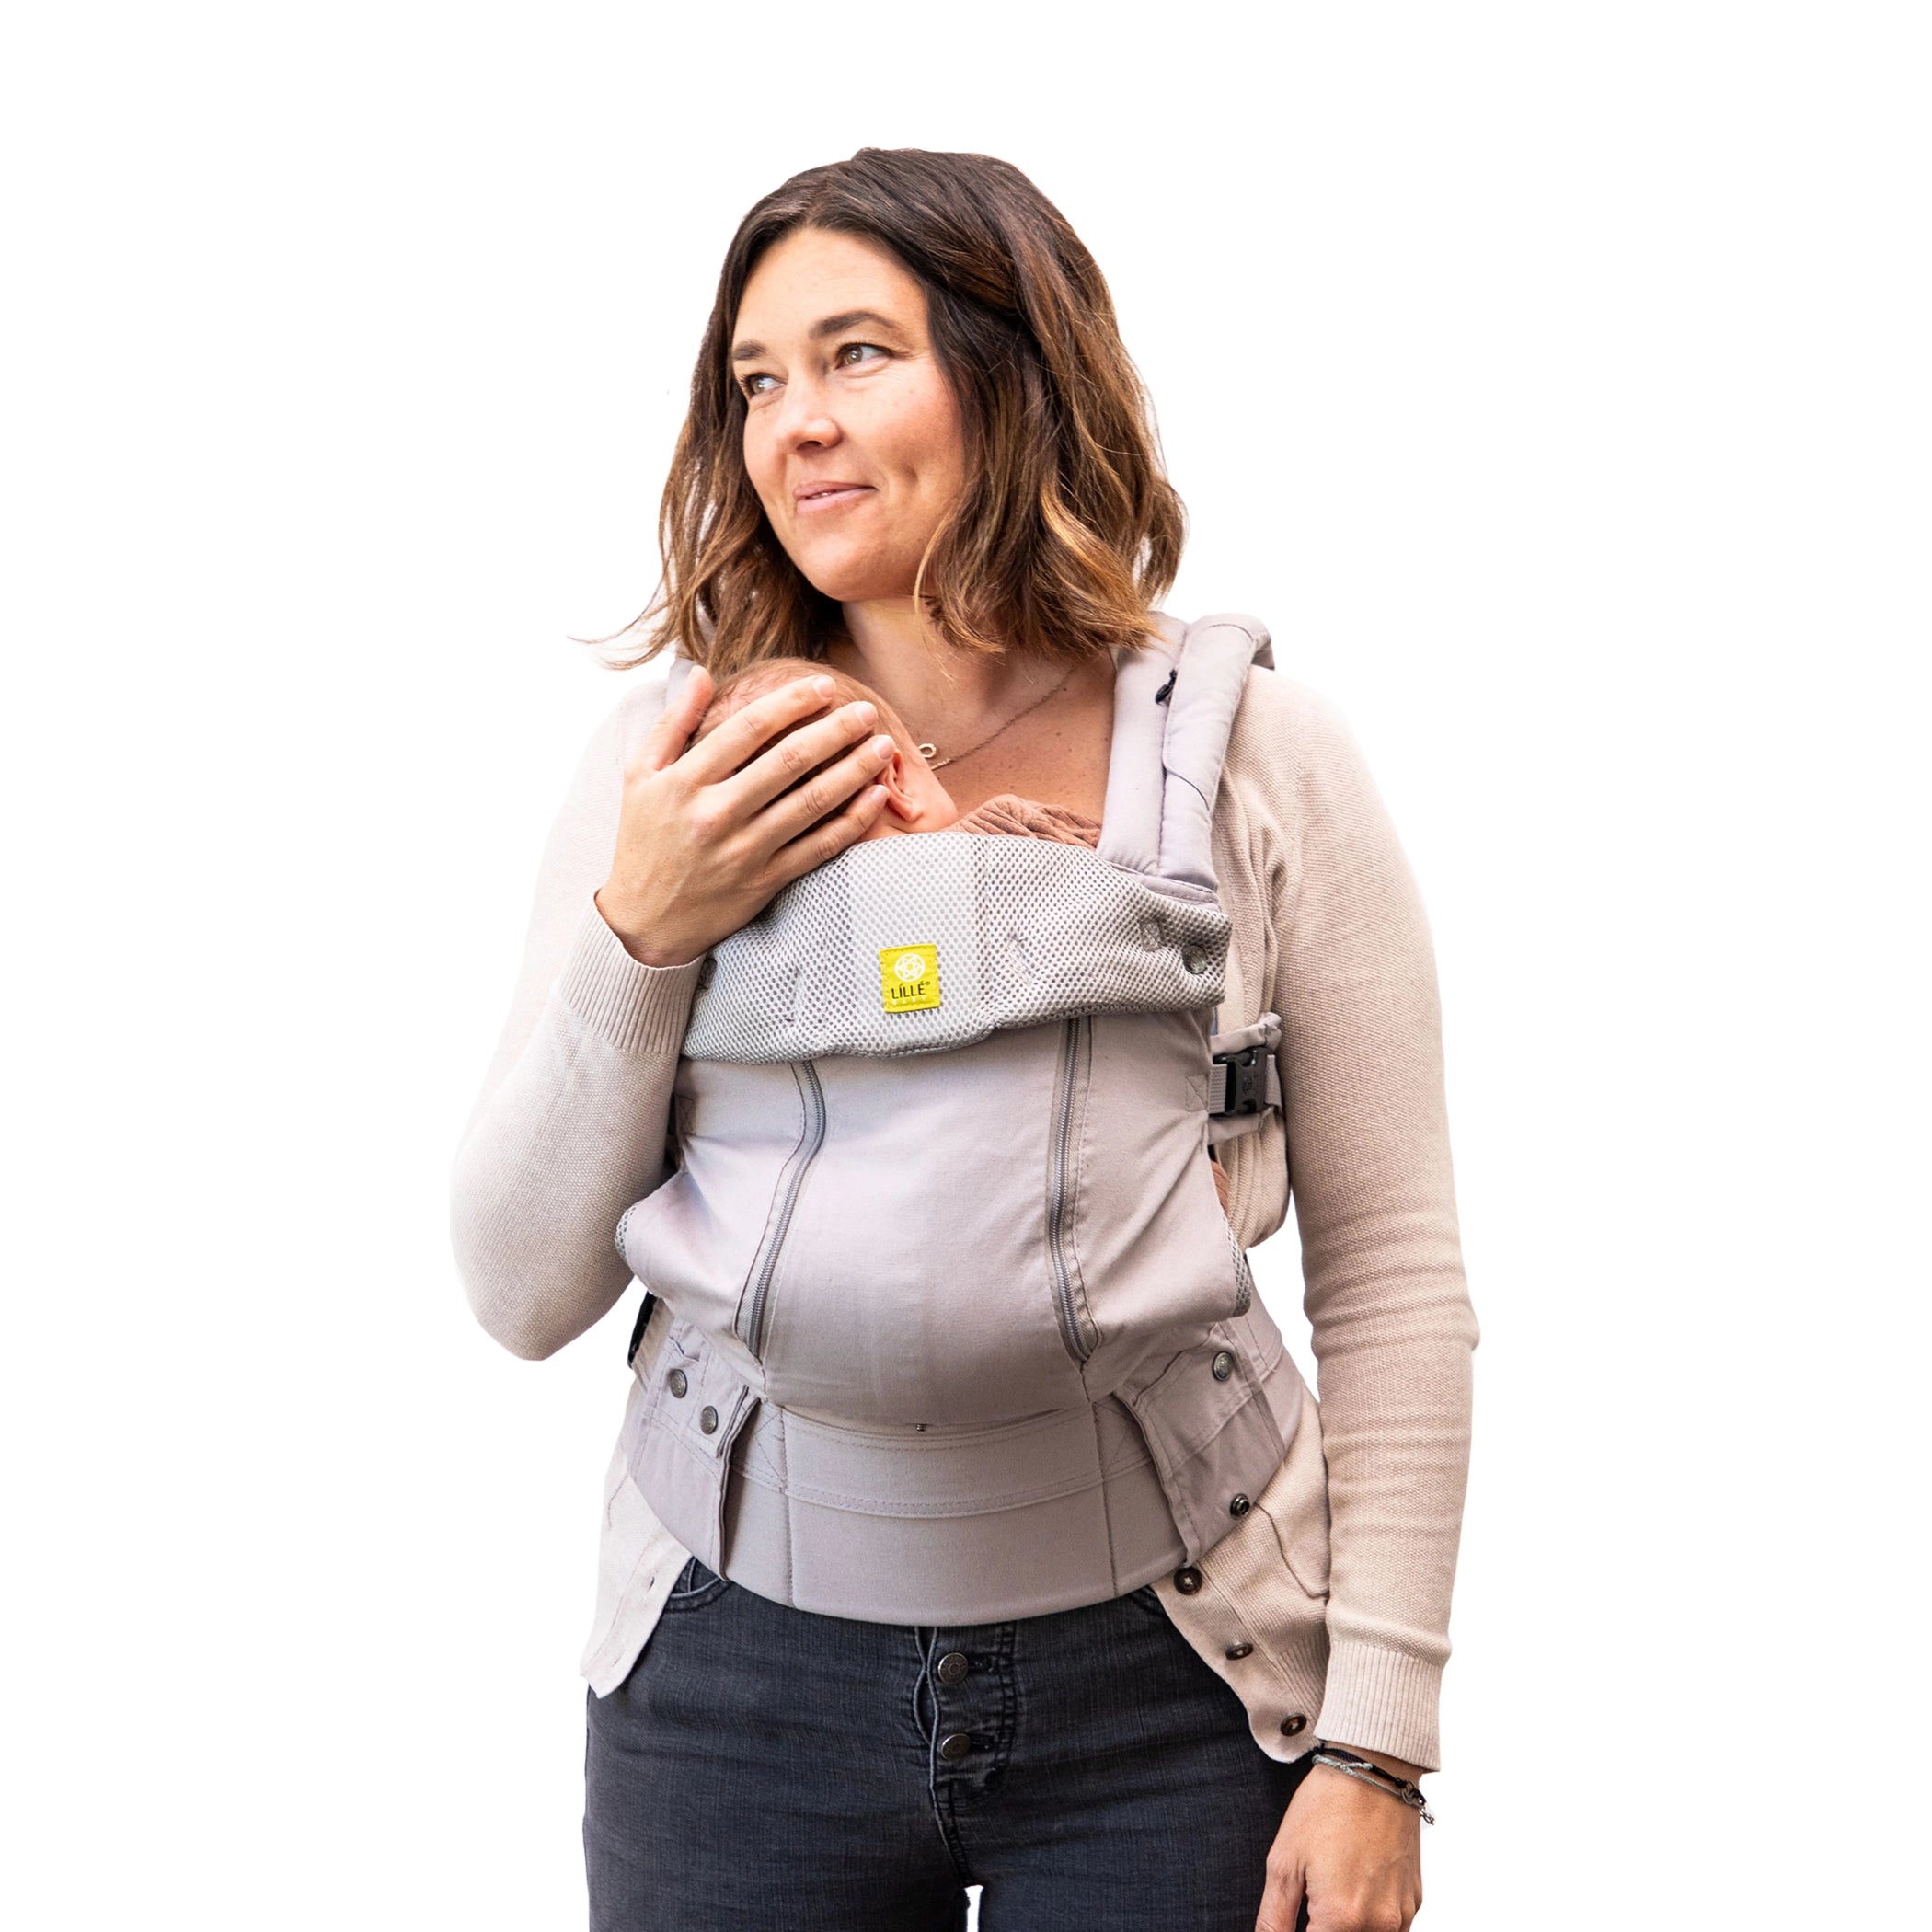 Complete all seasons carrier shown in fetal carry position with newborn